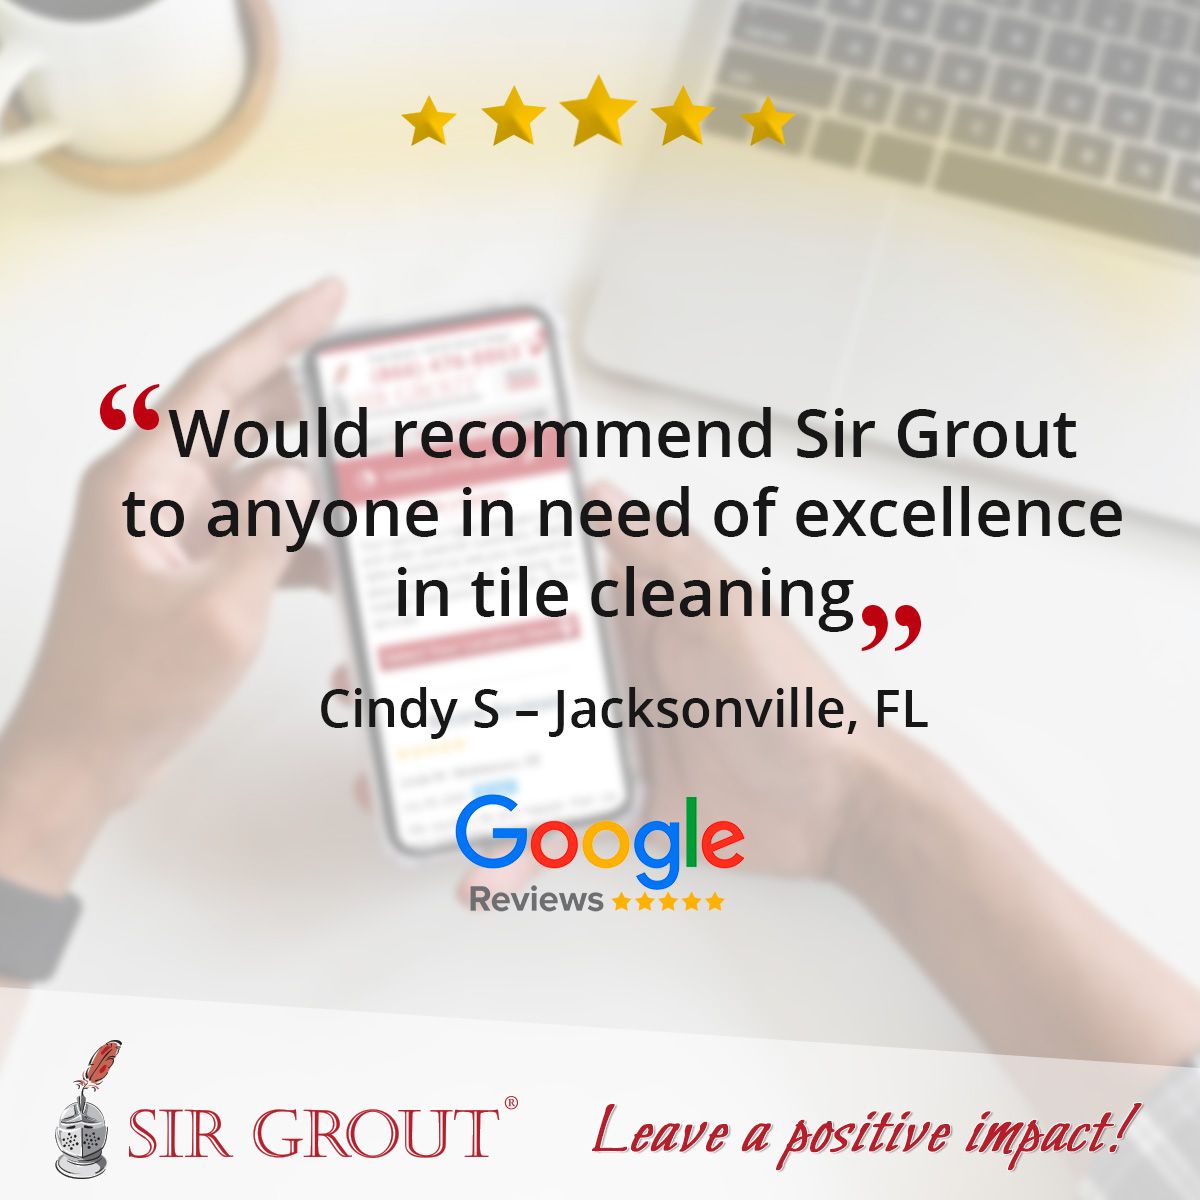 Would recommend Sir Grout to anyone in need of excellence in tile cleaning.